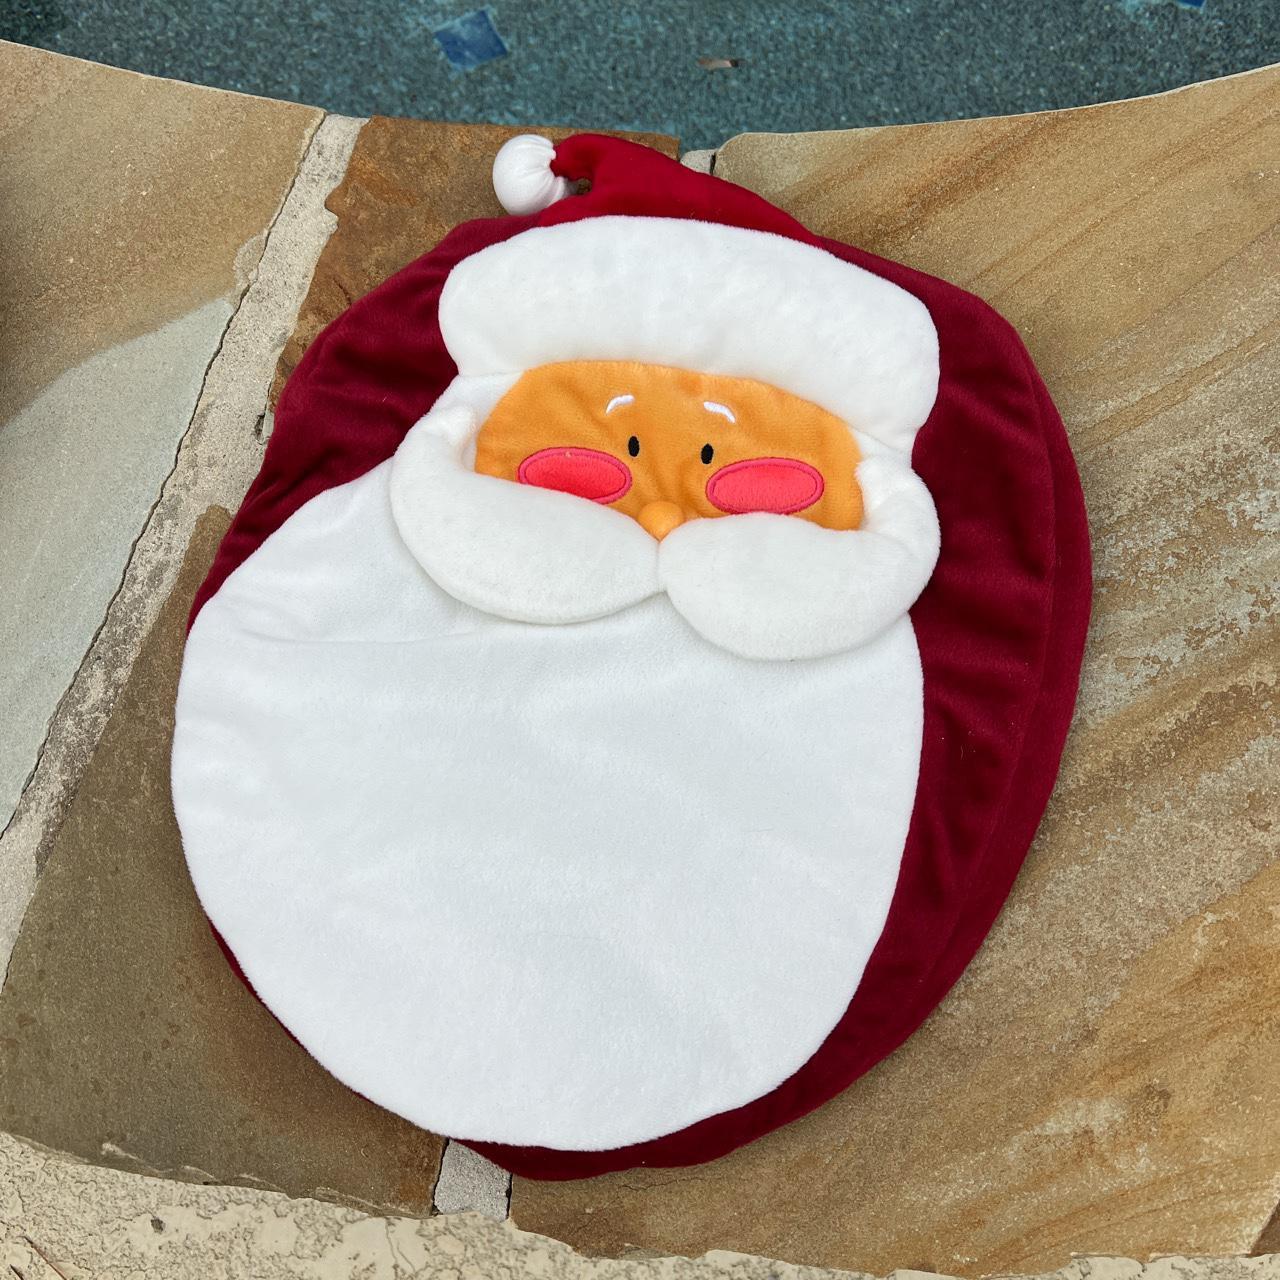 Product Image 1 - GIFTING SANTA TOILET COVER

🌈Standard size